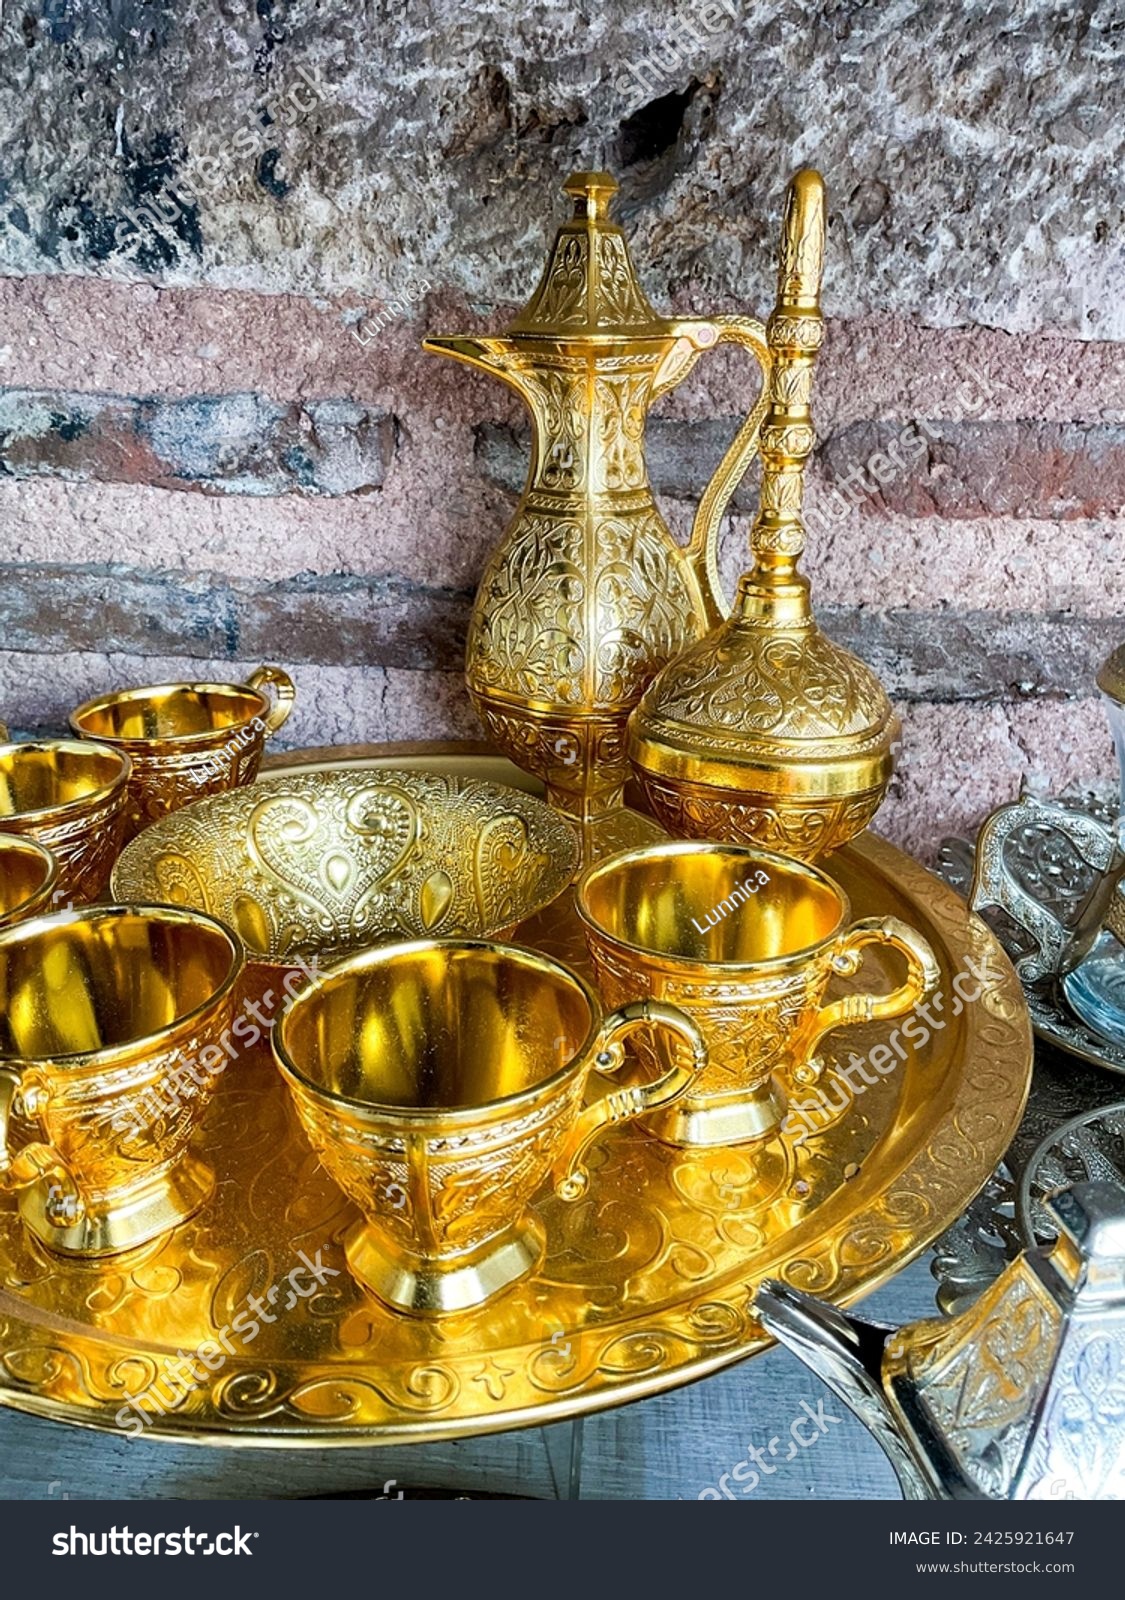 Vintage golden tea set with intricate designs on tray against rustic stone wall. Traditional ornate metalware concept for interior design and decoration. #2425921647